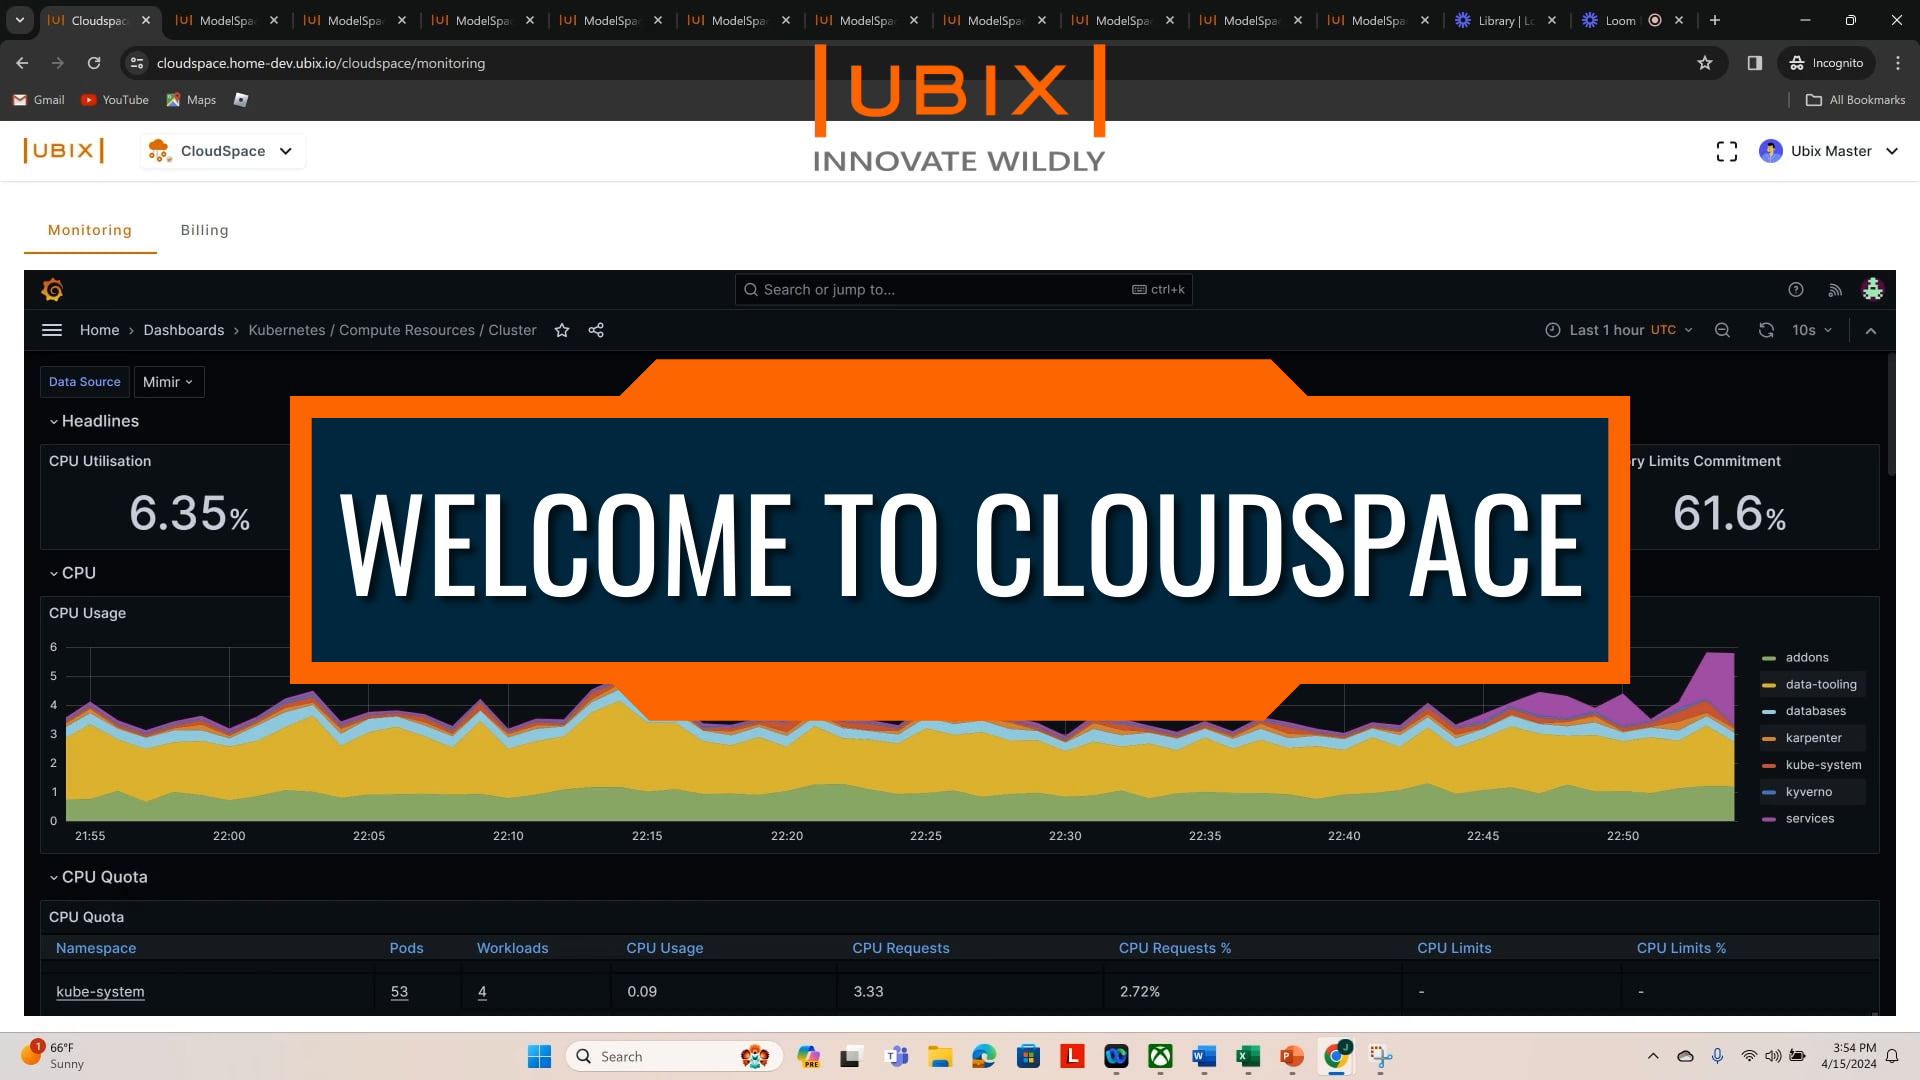 Welcome to CloudSpace